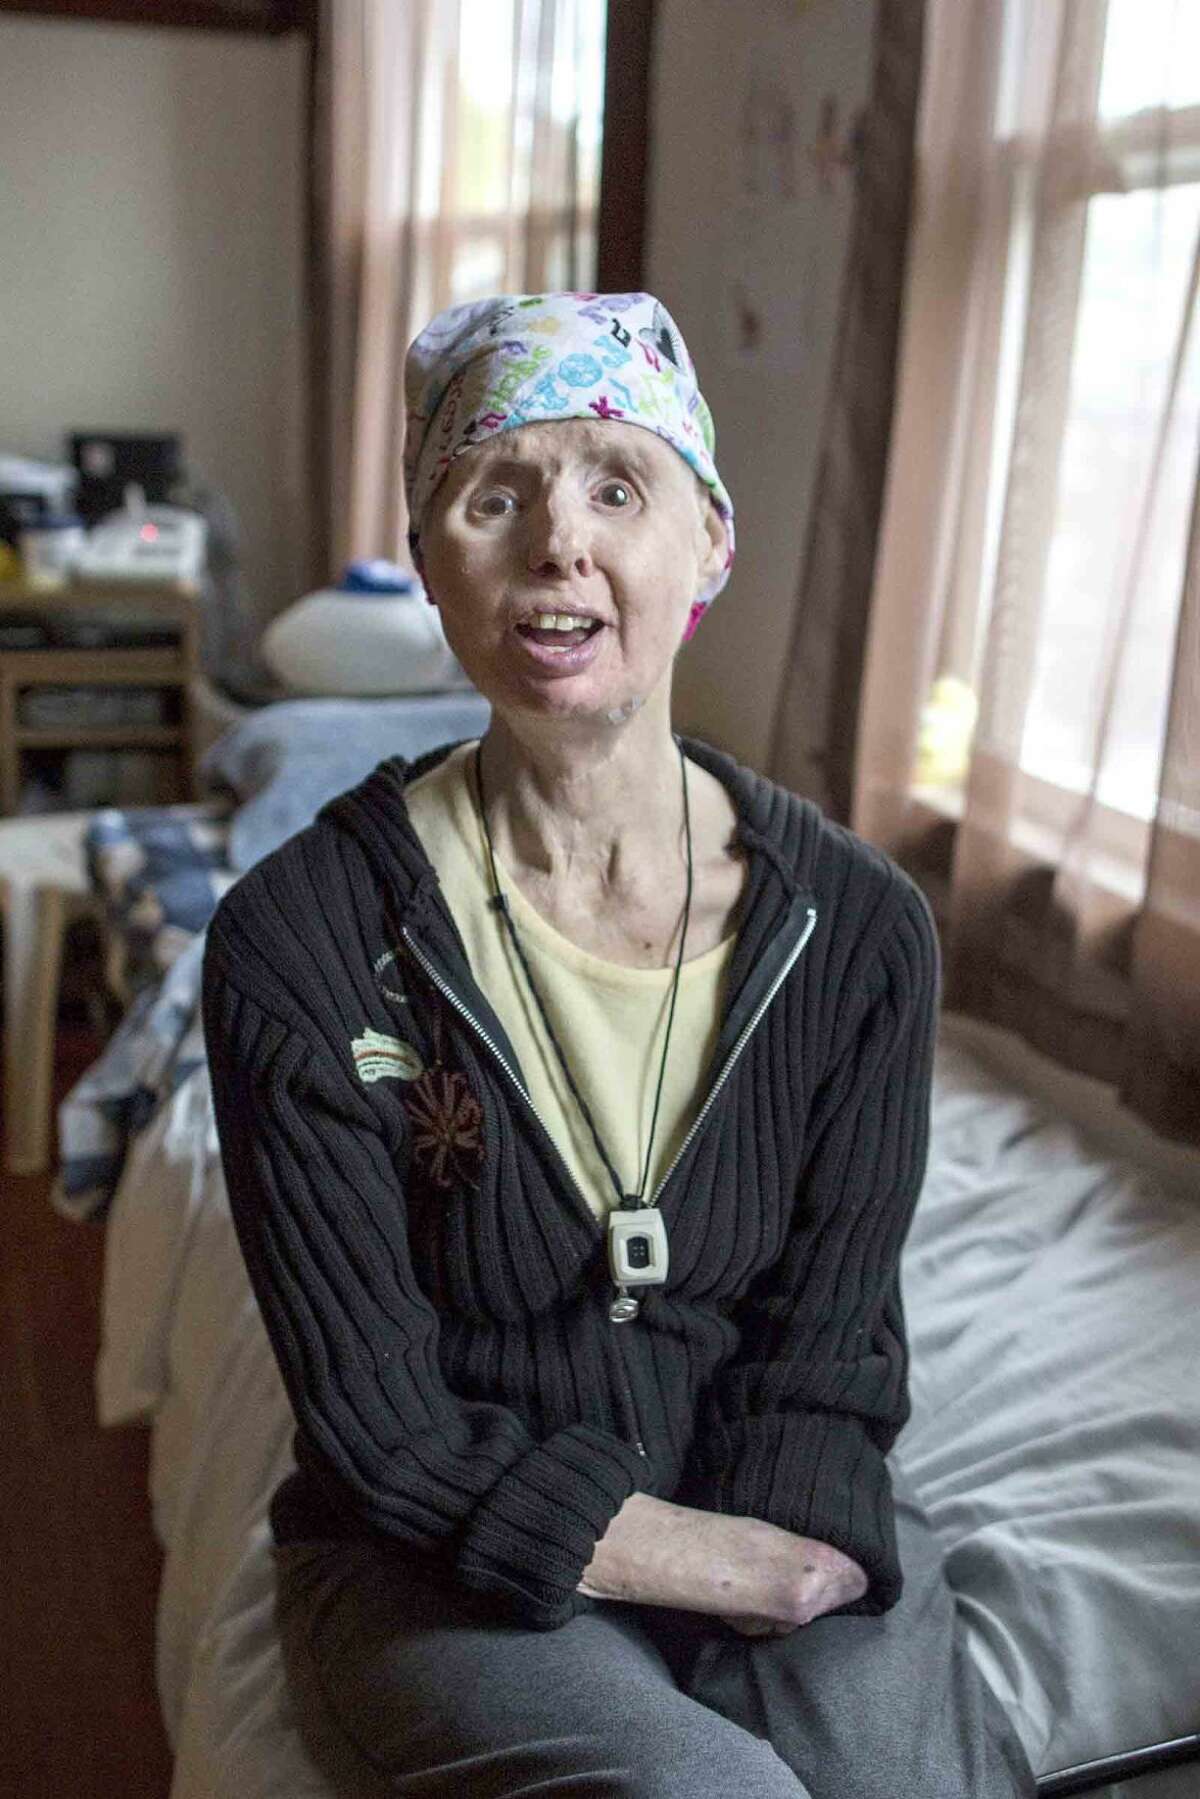 Charla Nash in her home in Boston, Massachusetts on Sunday, May 8, 2016. Nash received a full-face transplant in 2011 after being attacked by a chimpanzee. (Scott Eisen for The Stamford Advocate)